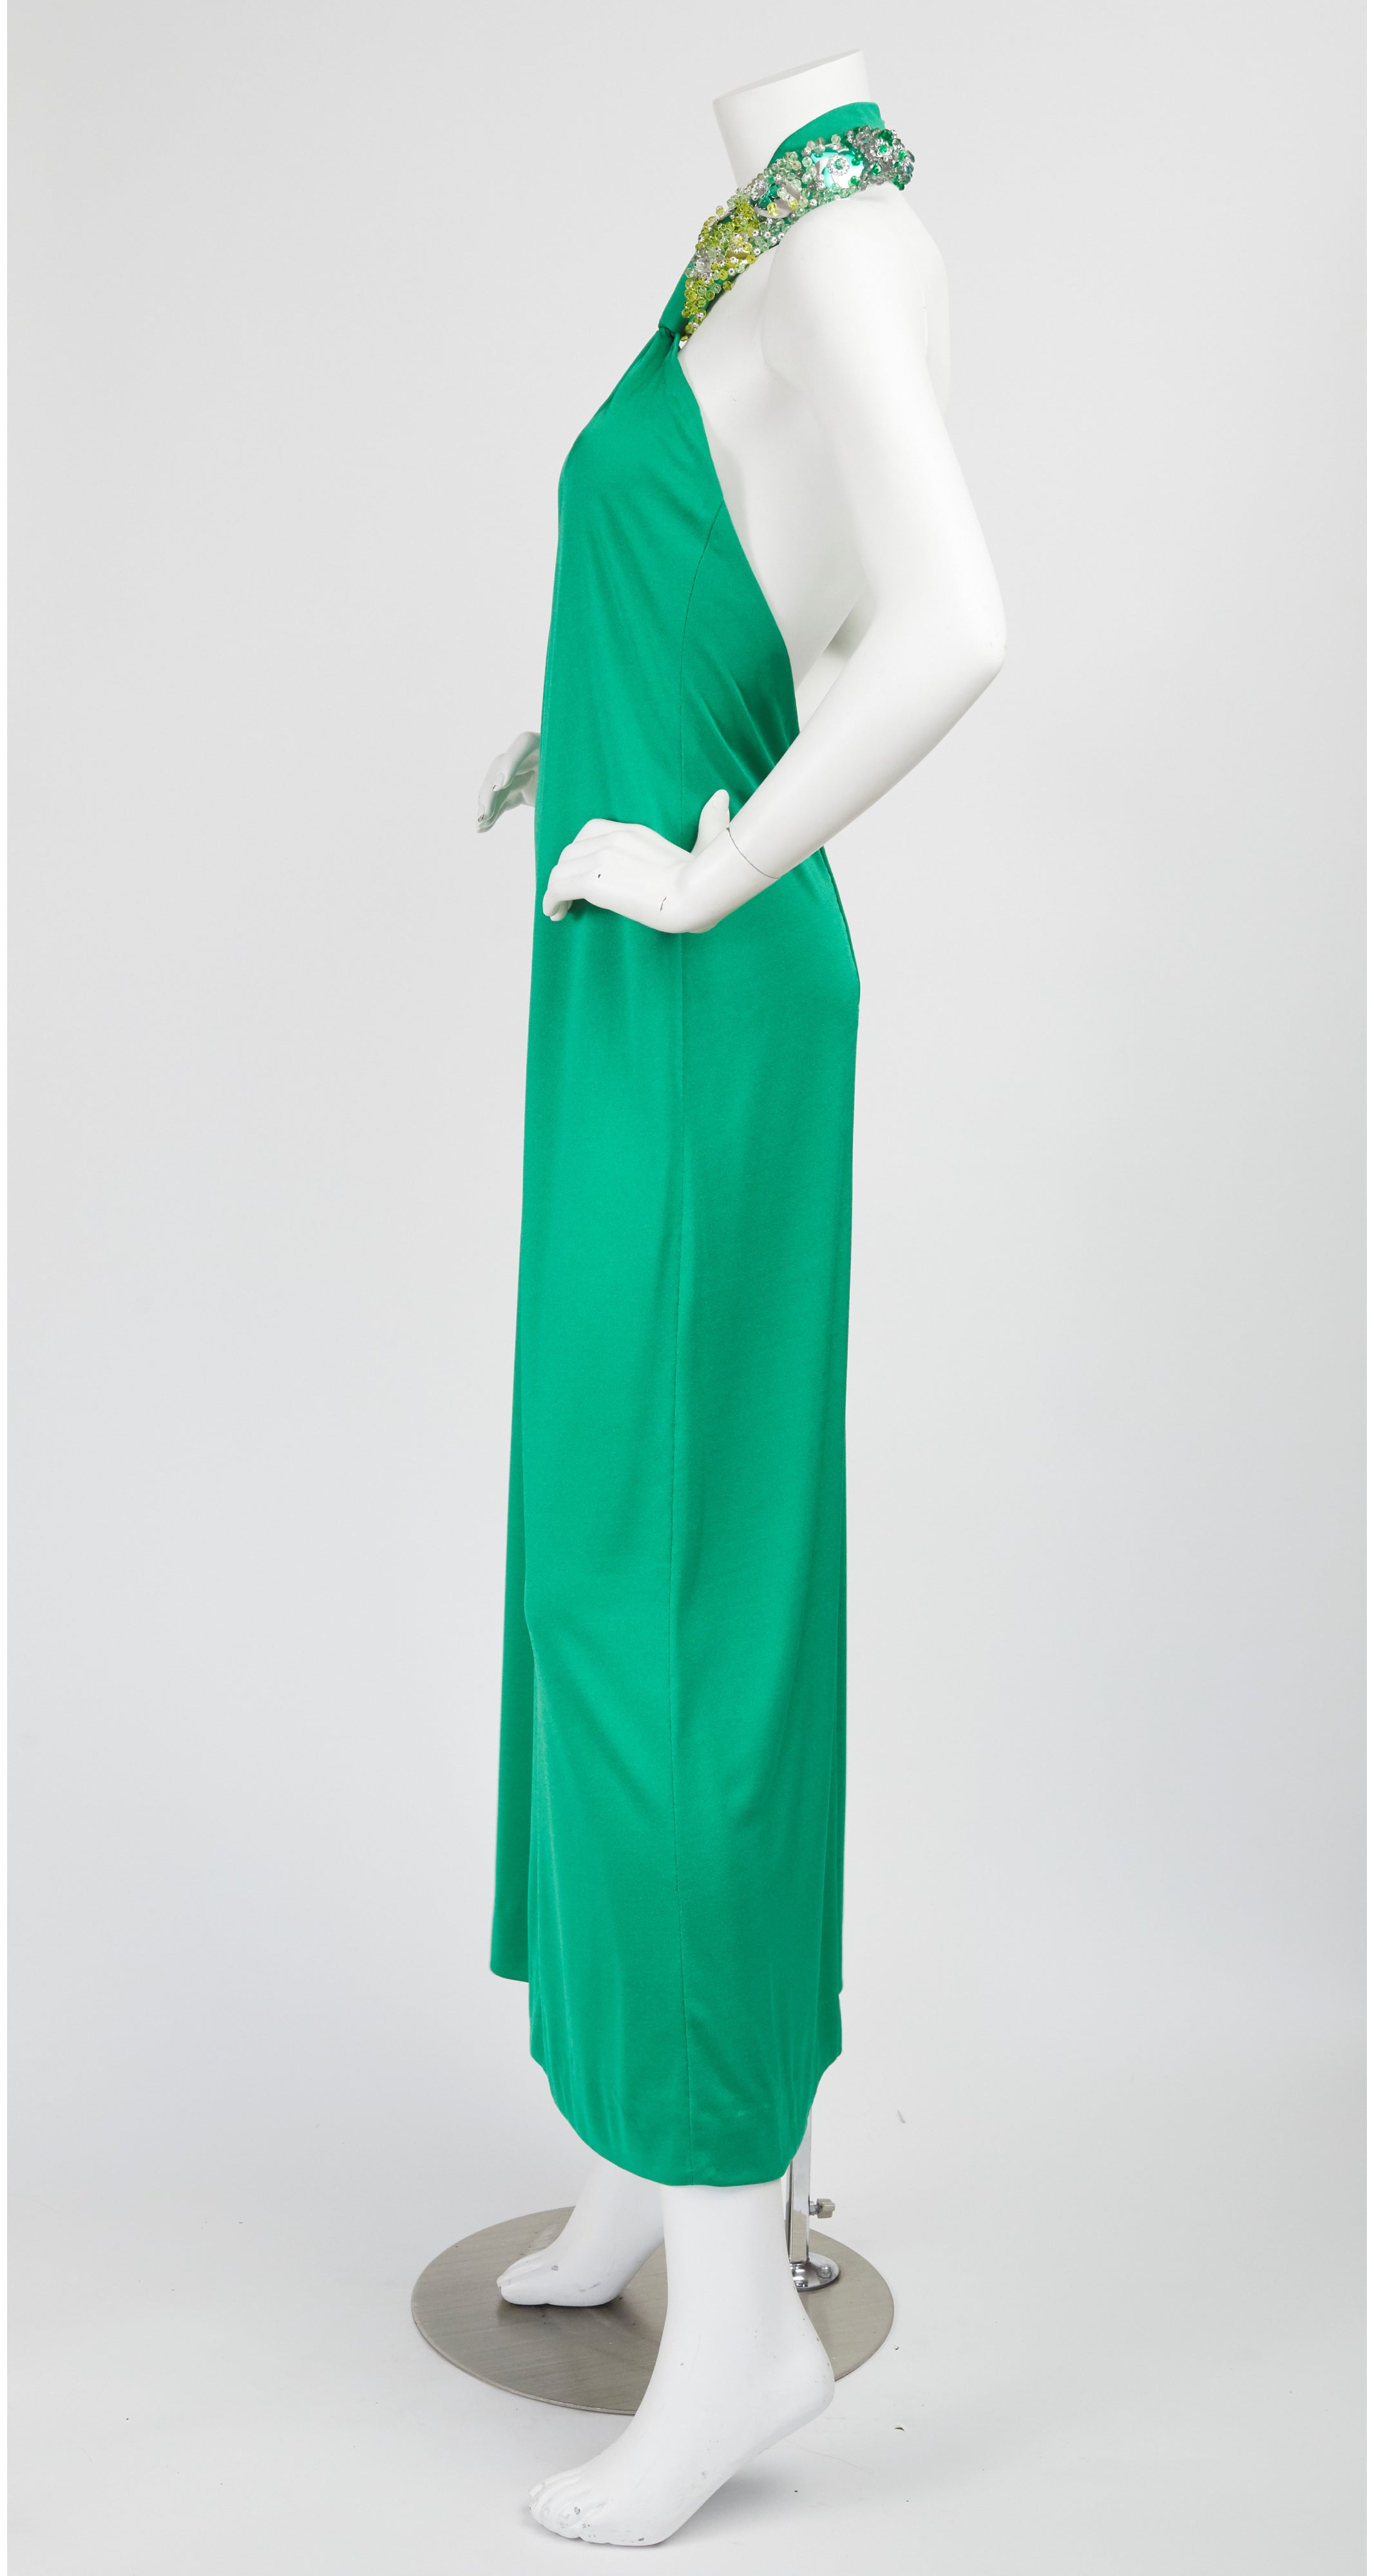 1970s Beaded Collar Green Jersey Backless Gown